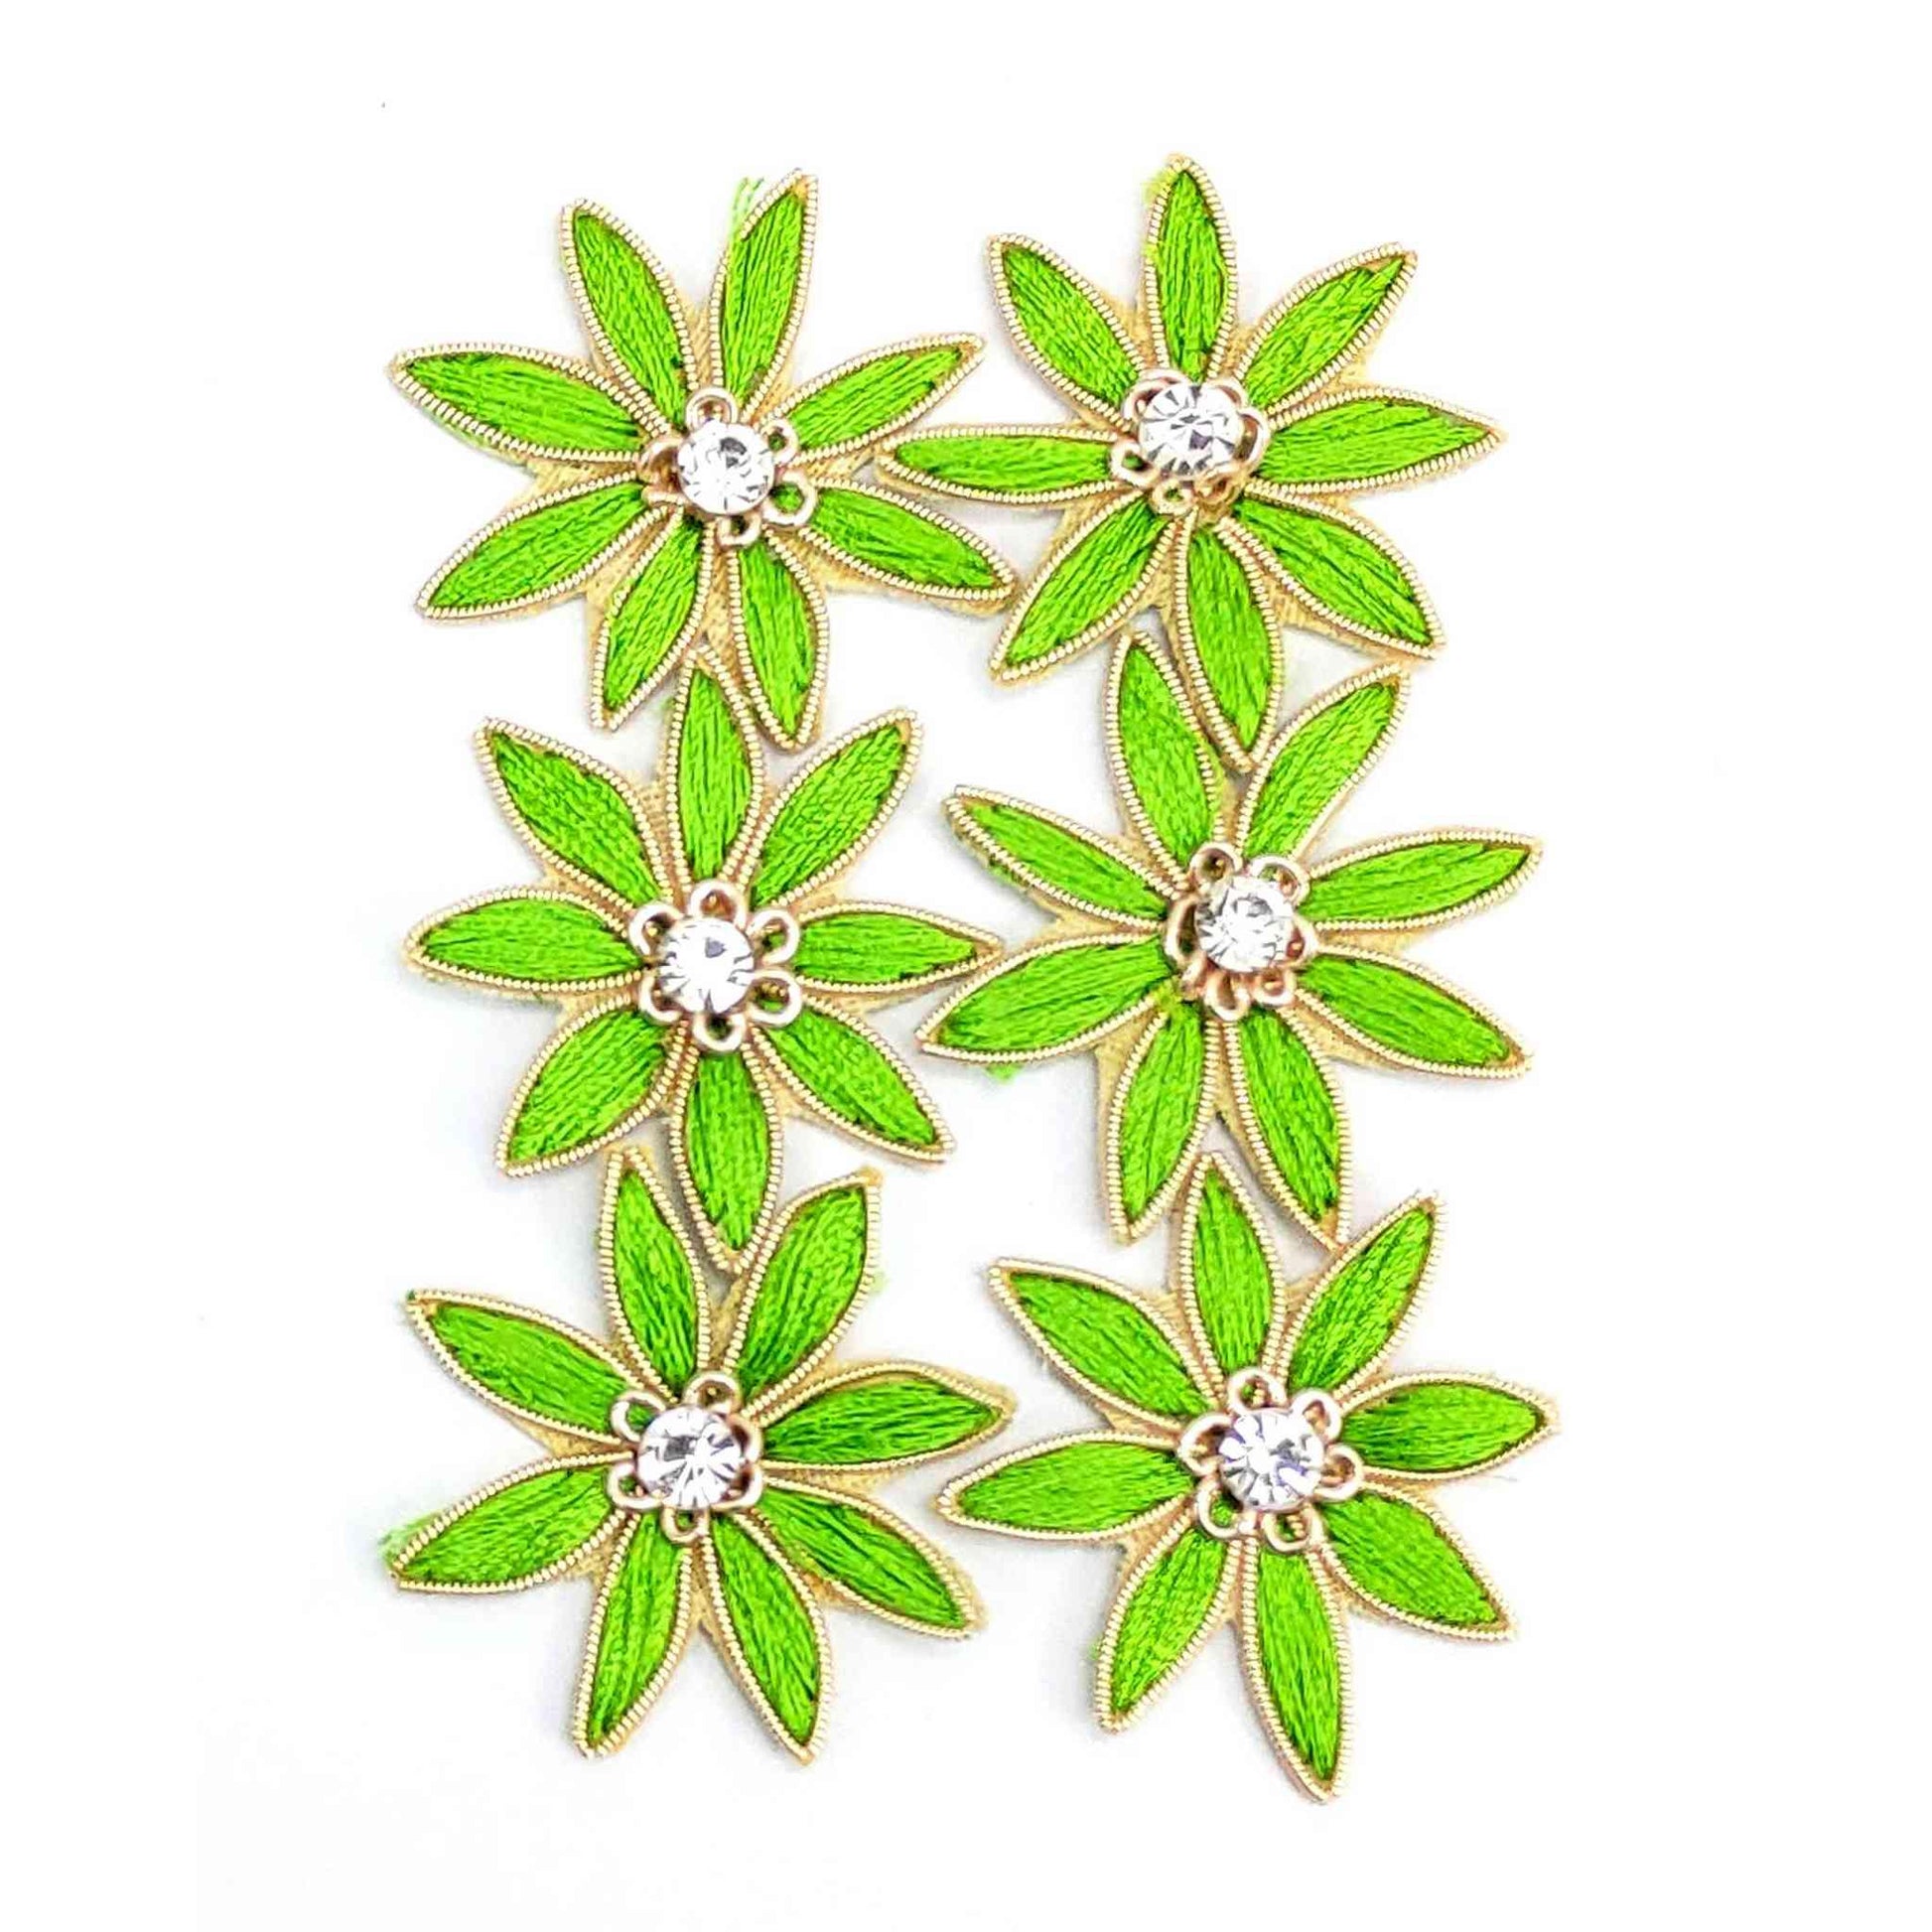 Indian Petals Threaded Strar Style Buti for DIY Craft, Trousseau Packing or Decoration (Bunch of 12) - Design 215, Green - Indian Petals